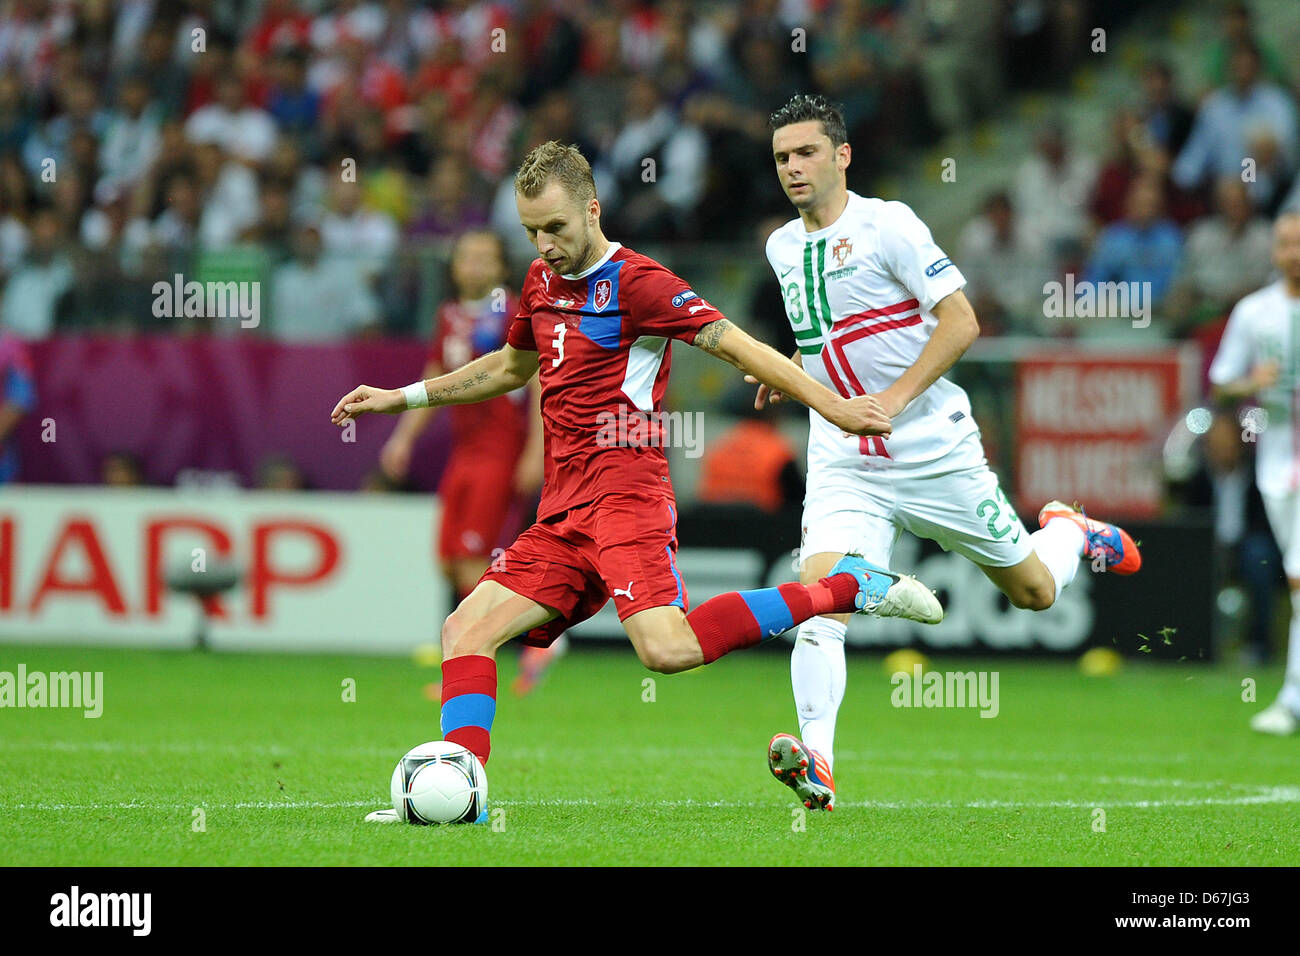 Czech Republic's Michael Kadlec (l) plays against Portugal's Helder Postiga during a Euro 2012 quarter final match between the Czech Republic and Portugal in Warsaw, Portugal, 21 June 2012. Photo: Revierfoto Stock Photo